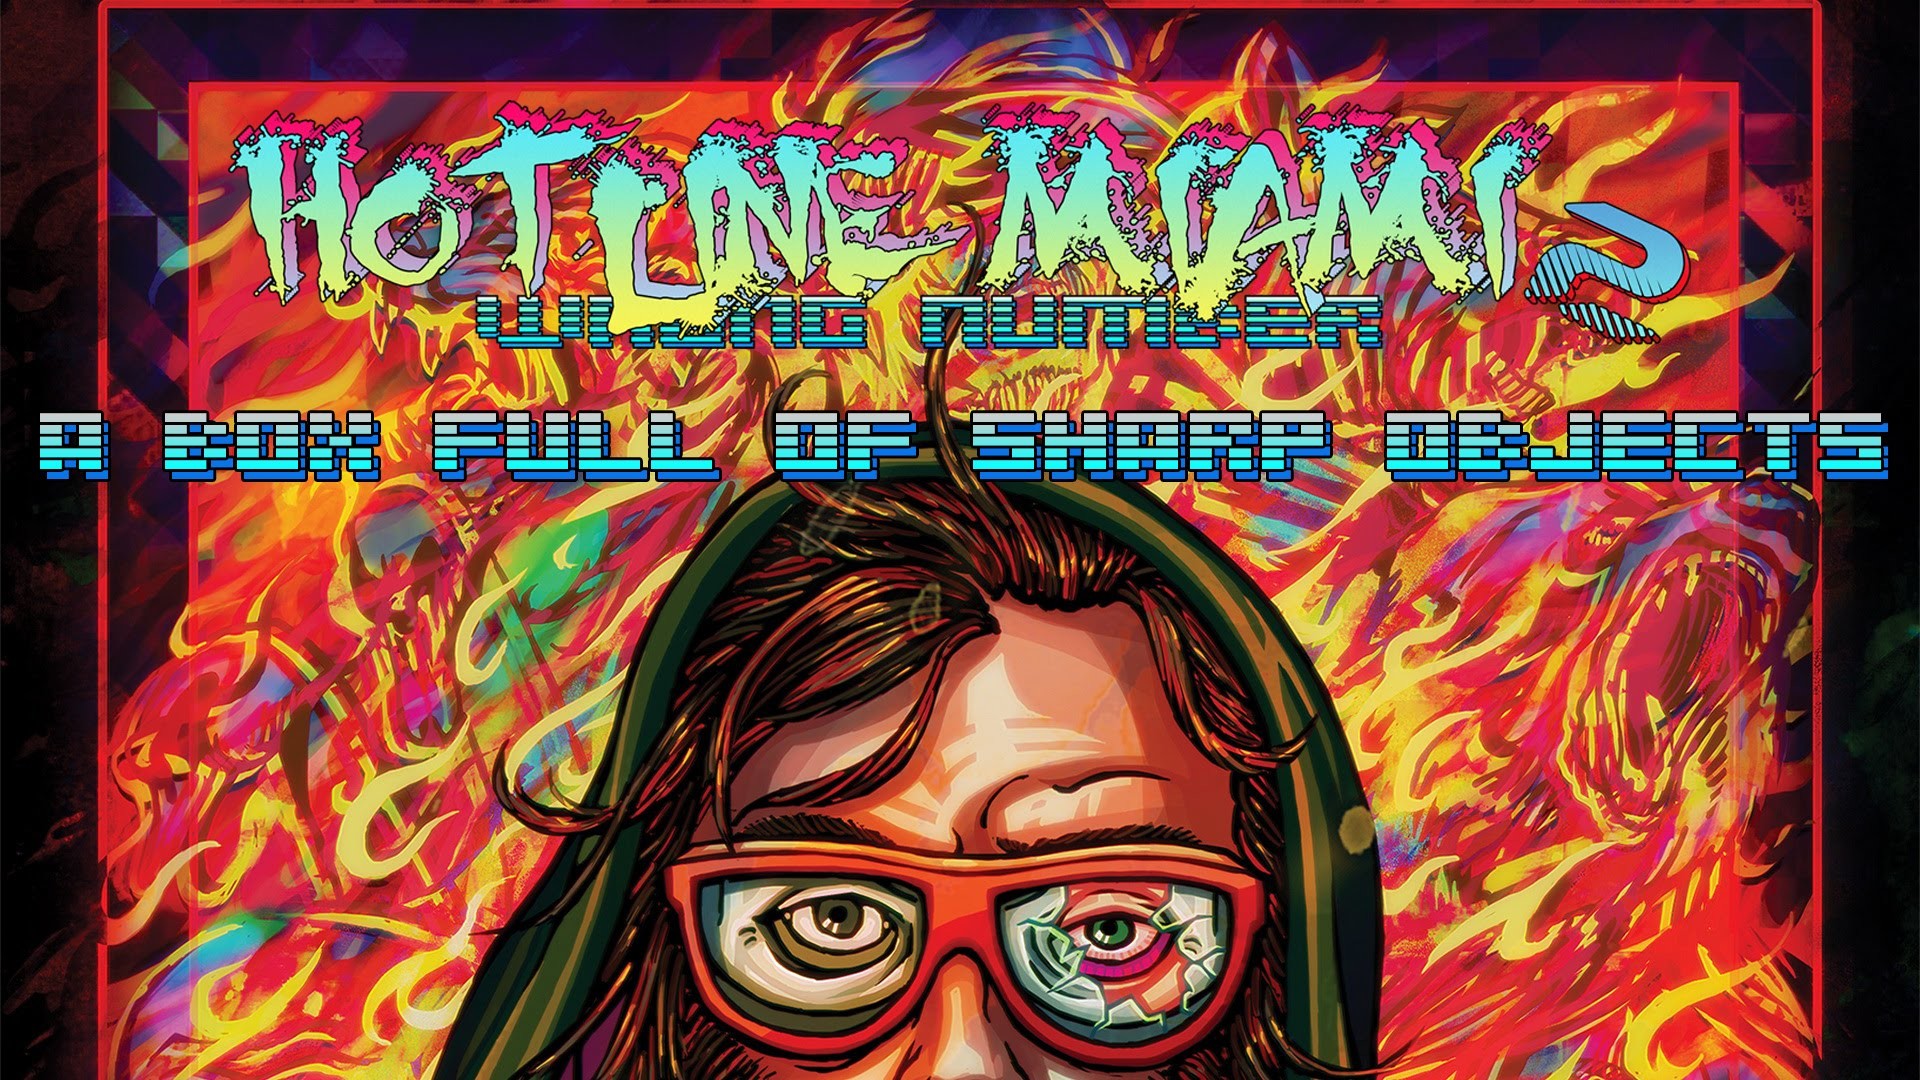 1920x1080 Hotline Miami 2 : Wrong Number - A box full of sharp objects